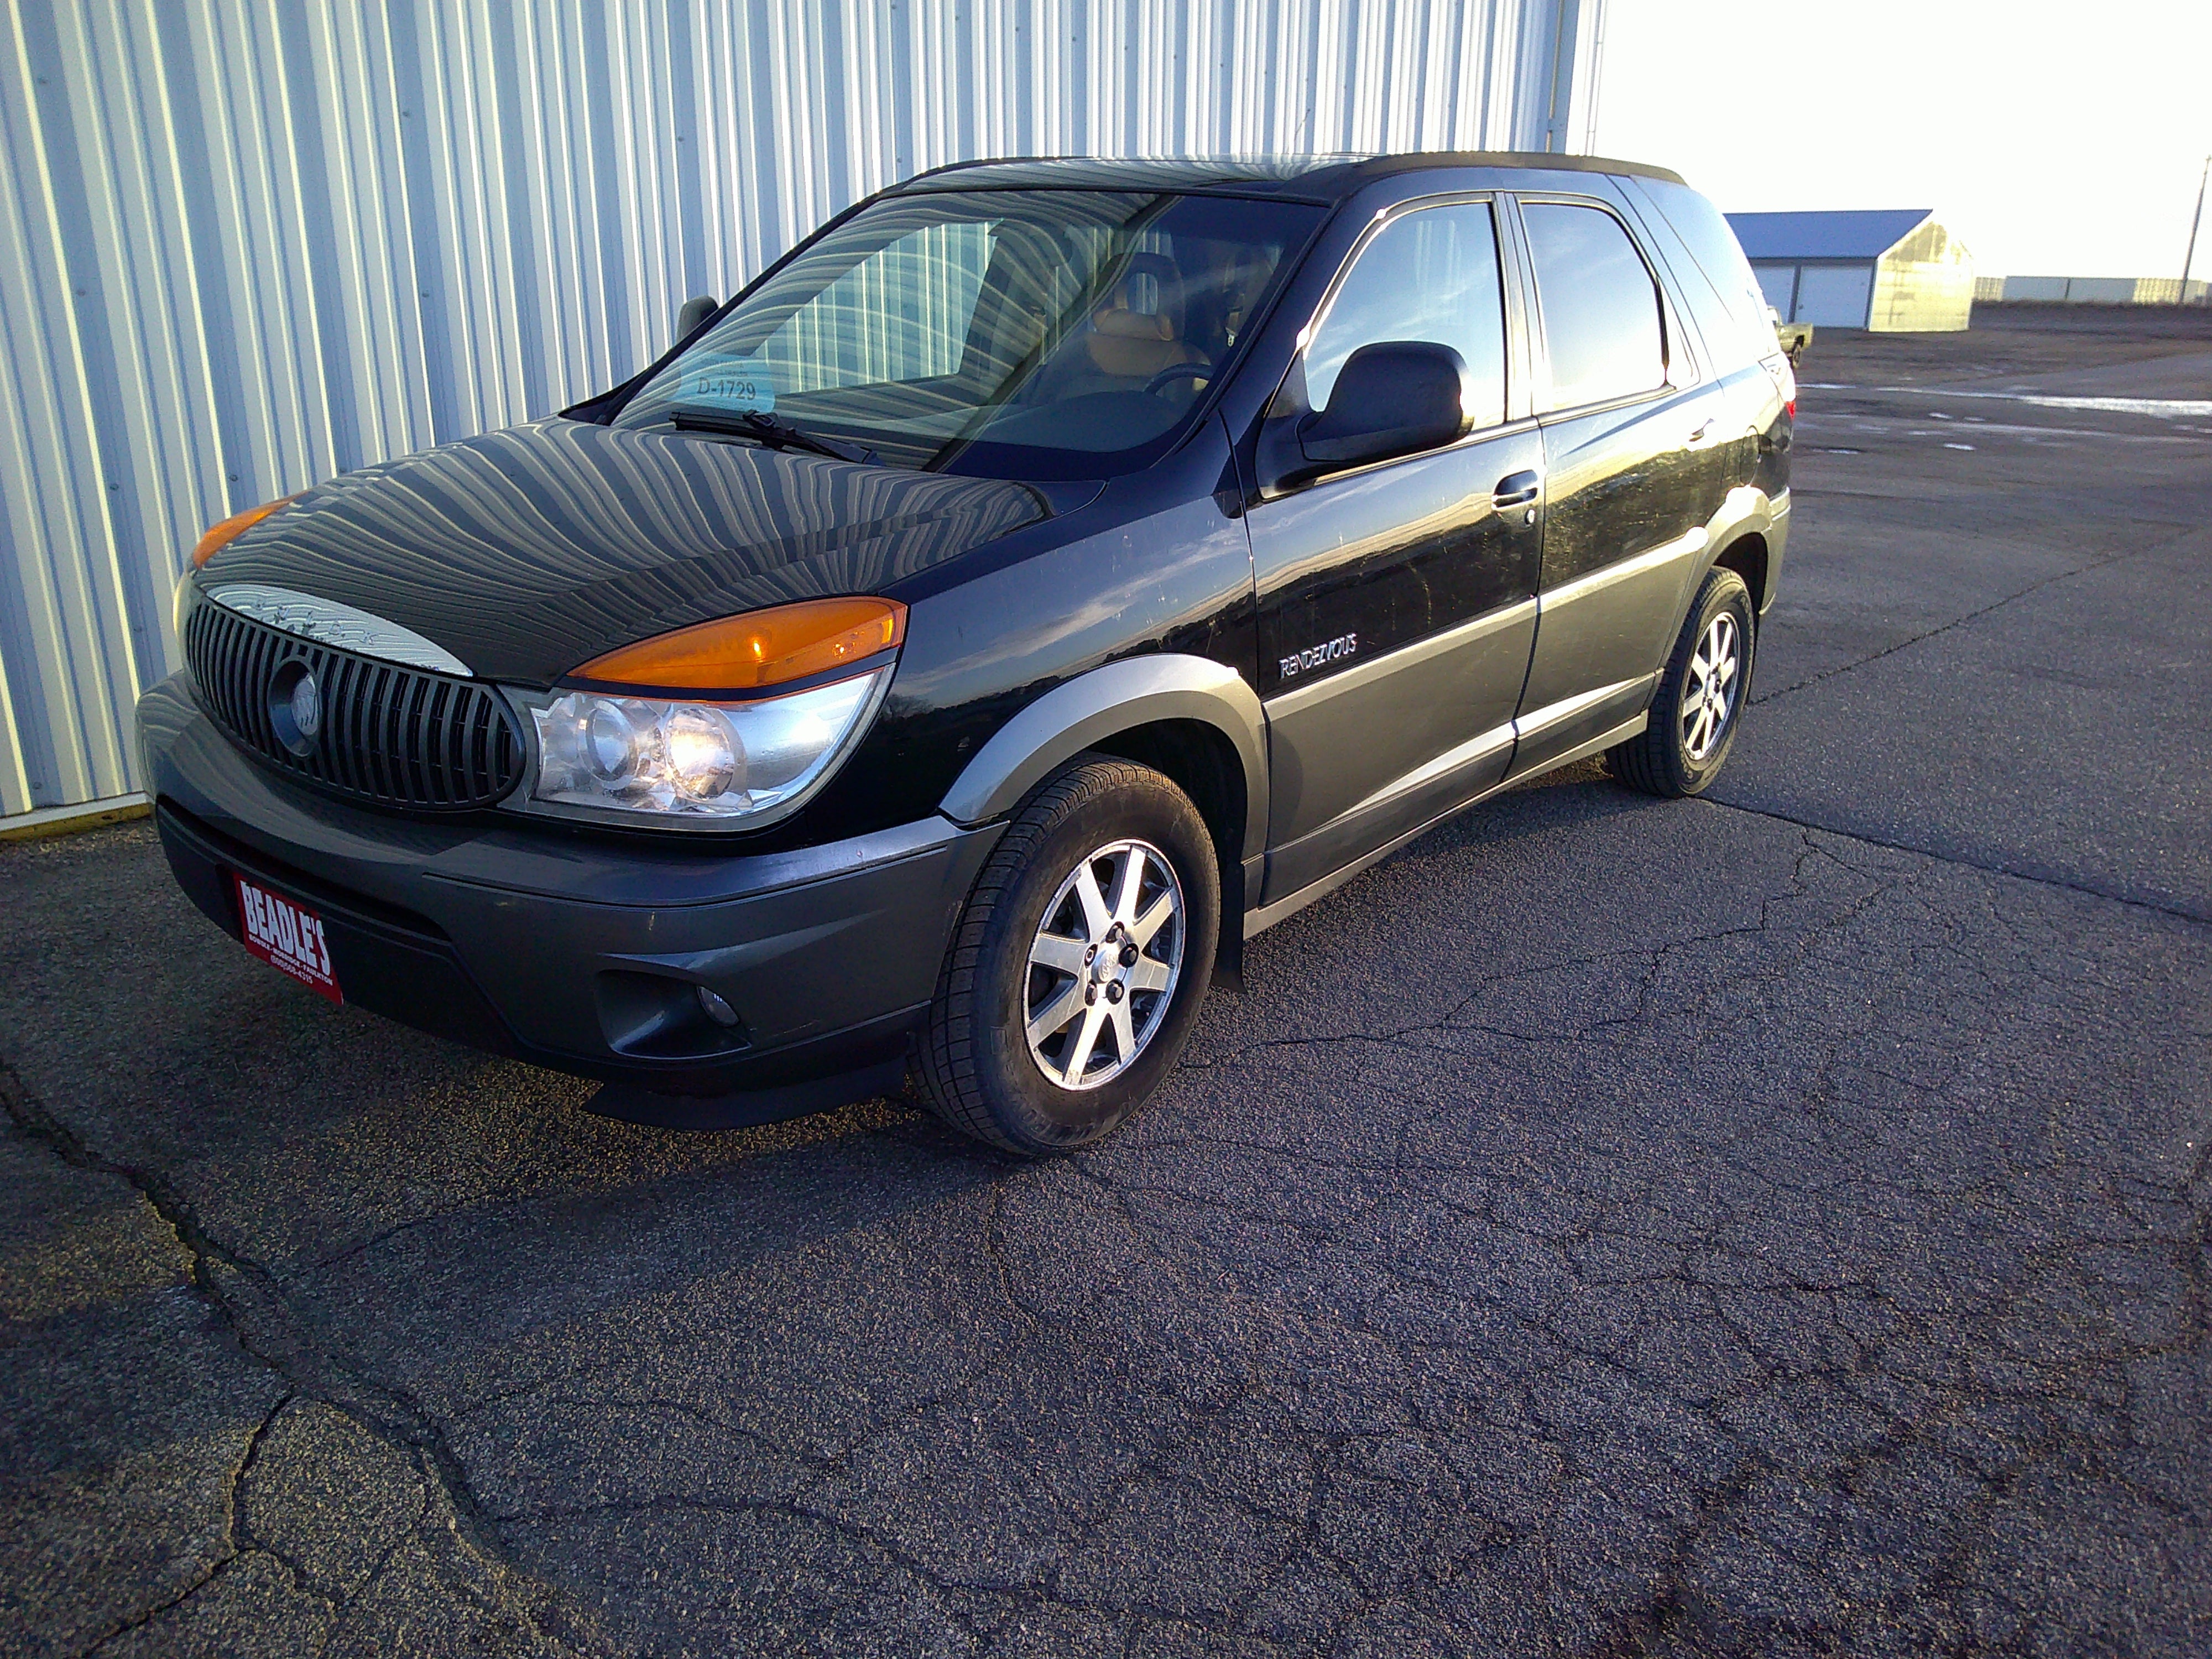 Used 2002 Buick Rendezvous FWD CX with VIN 3G5DA03E12S500578 for sale in Bowdle, SD